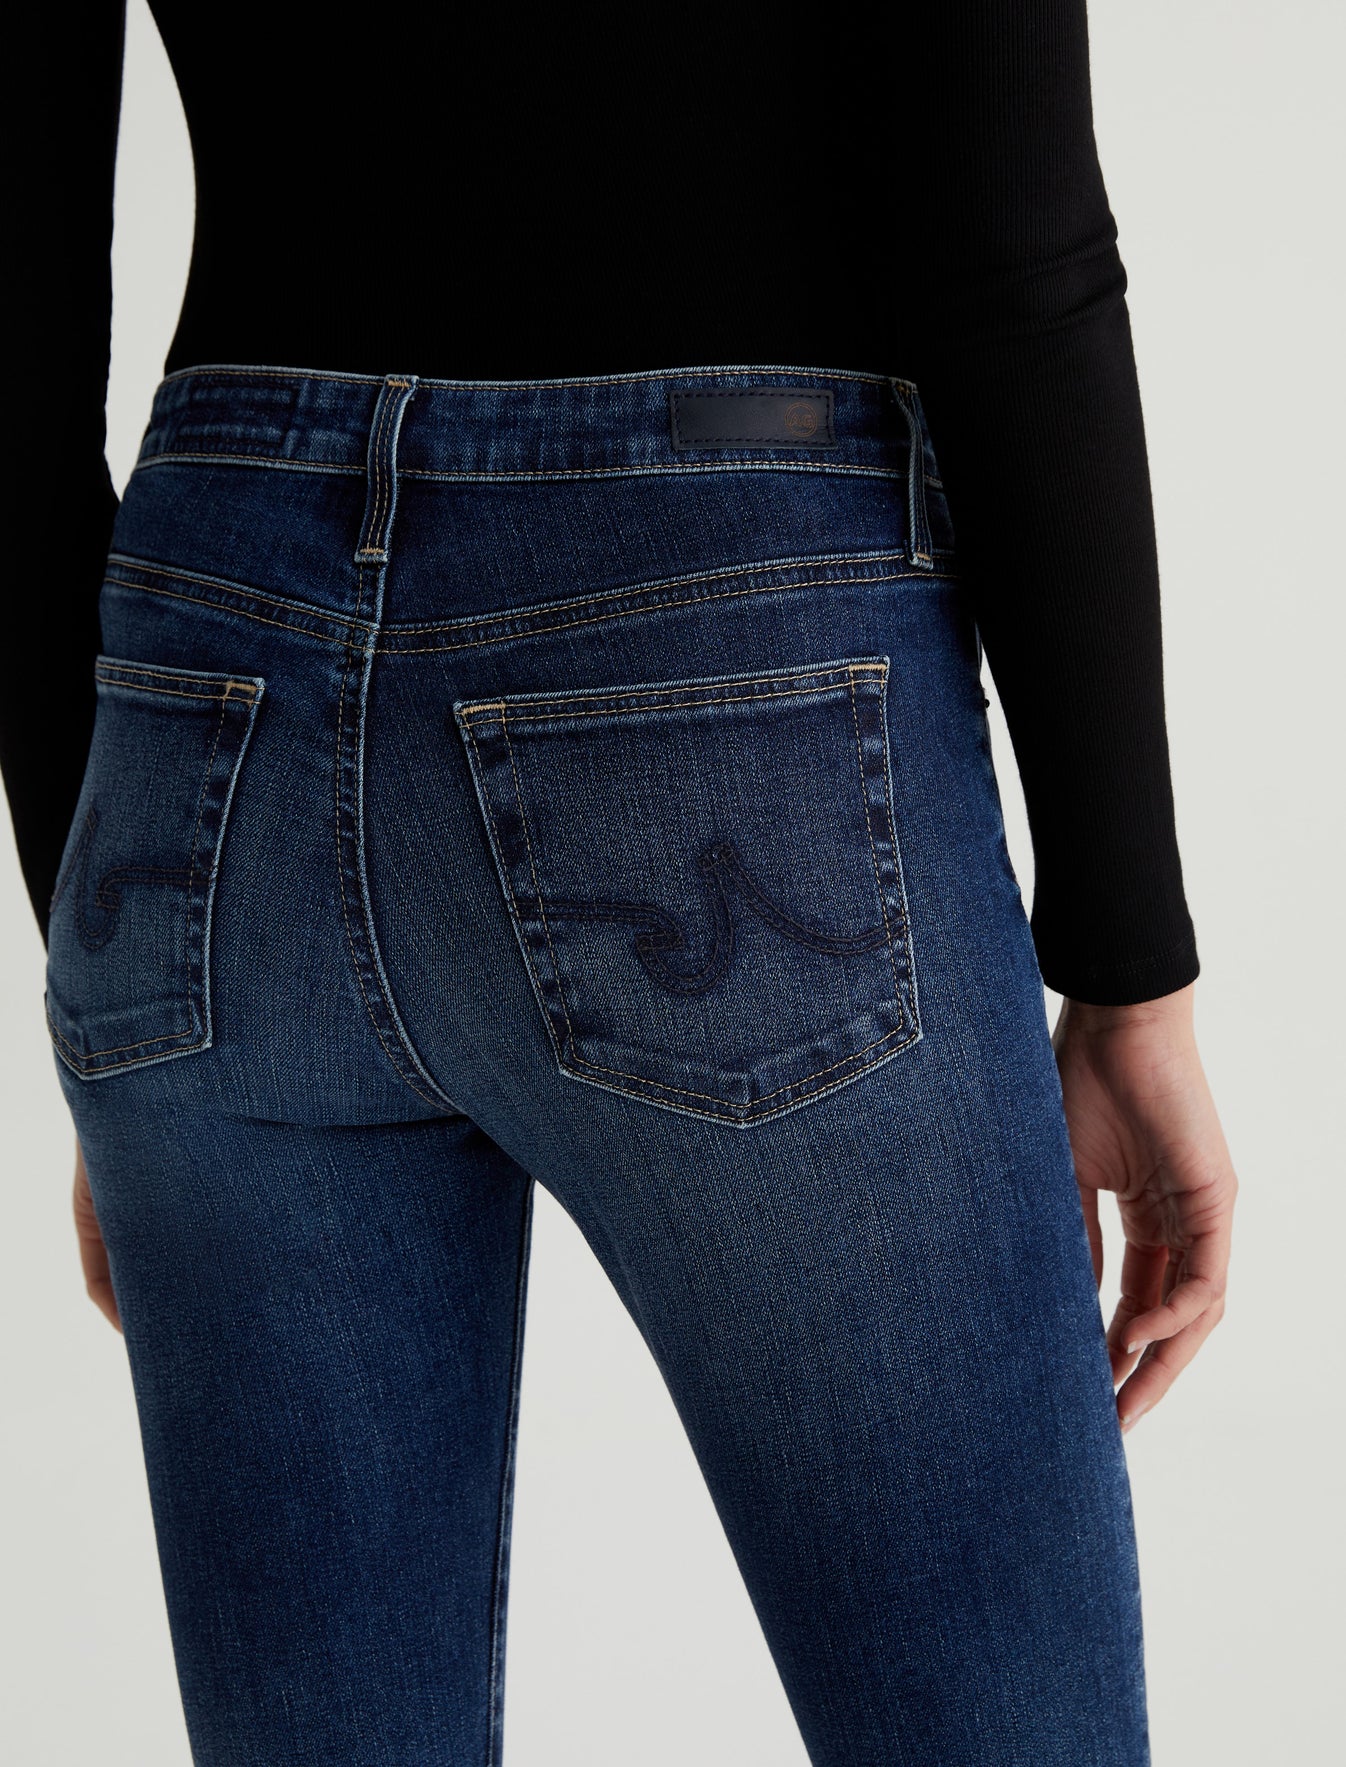 Womens Farrah Skinny Brooks at AG Jeans Official Store